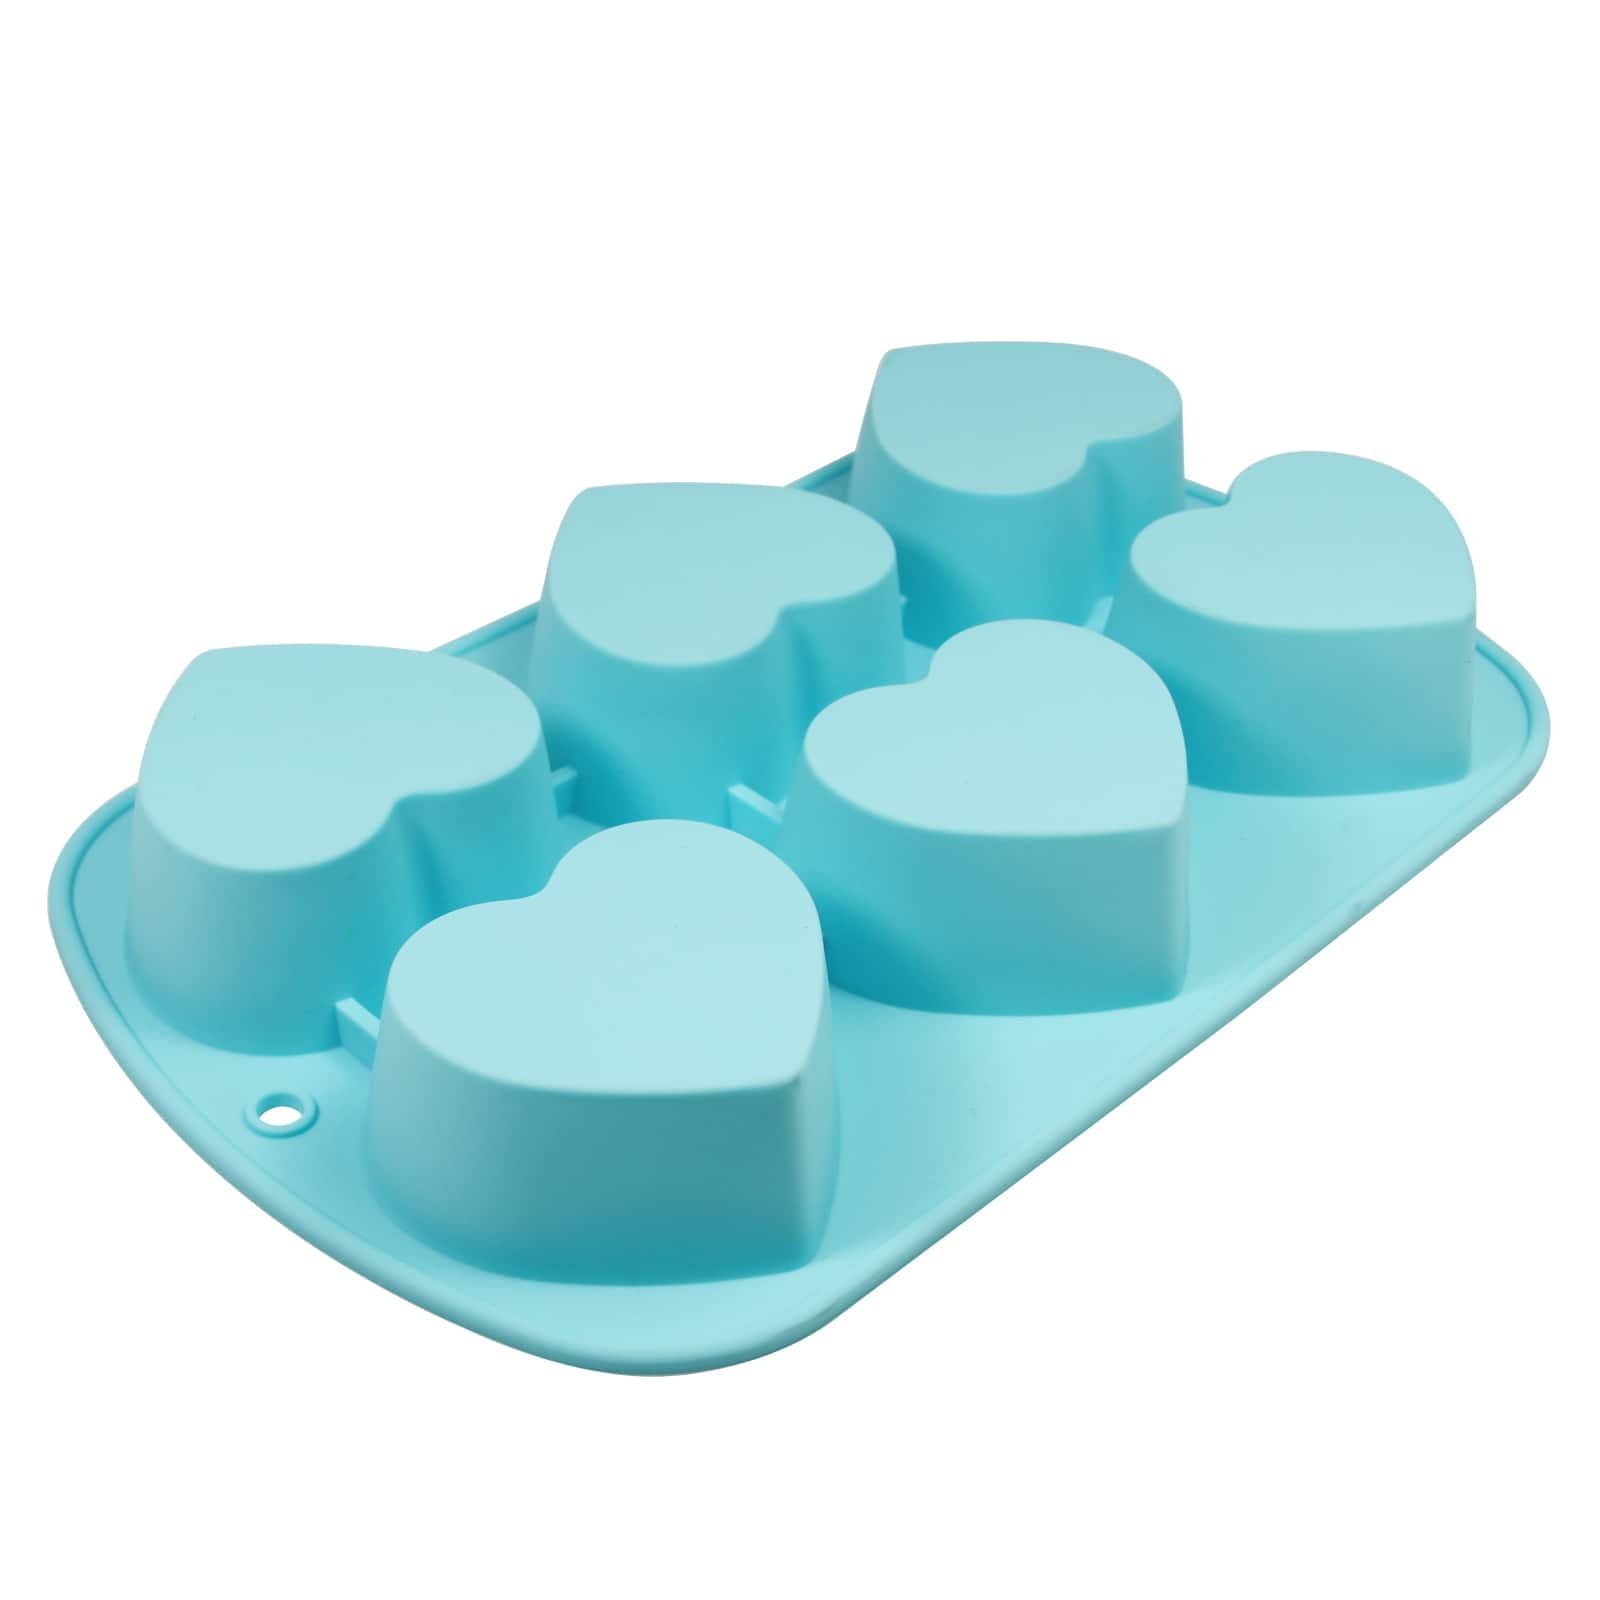 Silicone Heart Shaped Mold Tray by Traytastic!